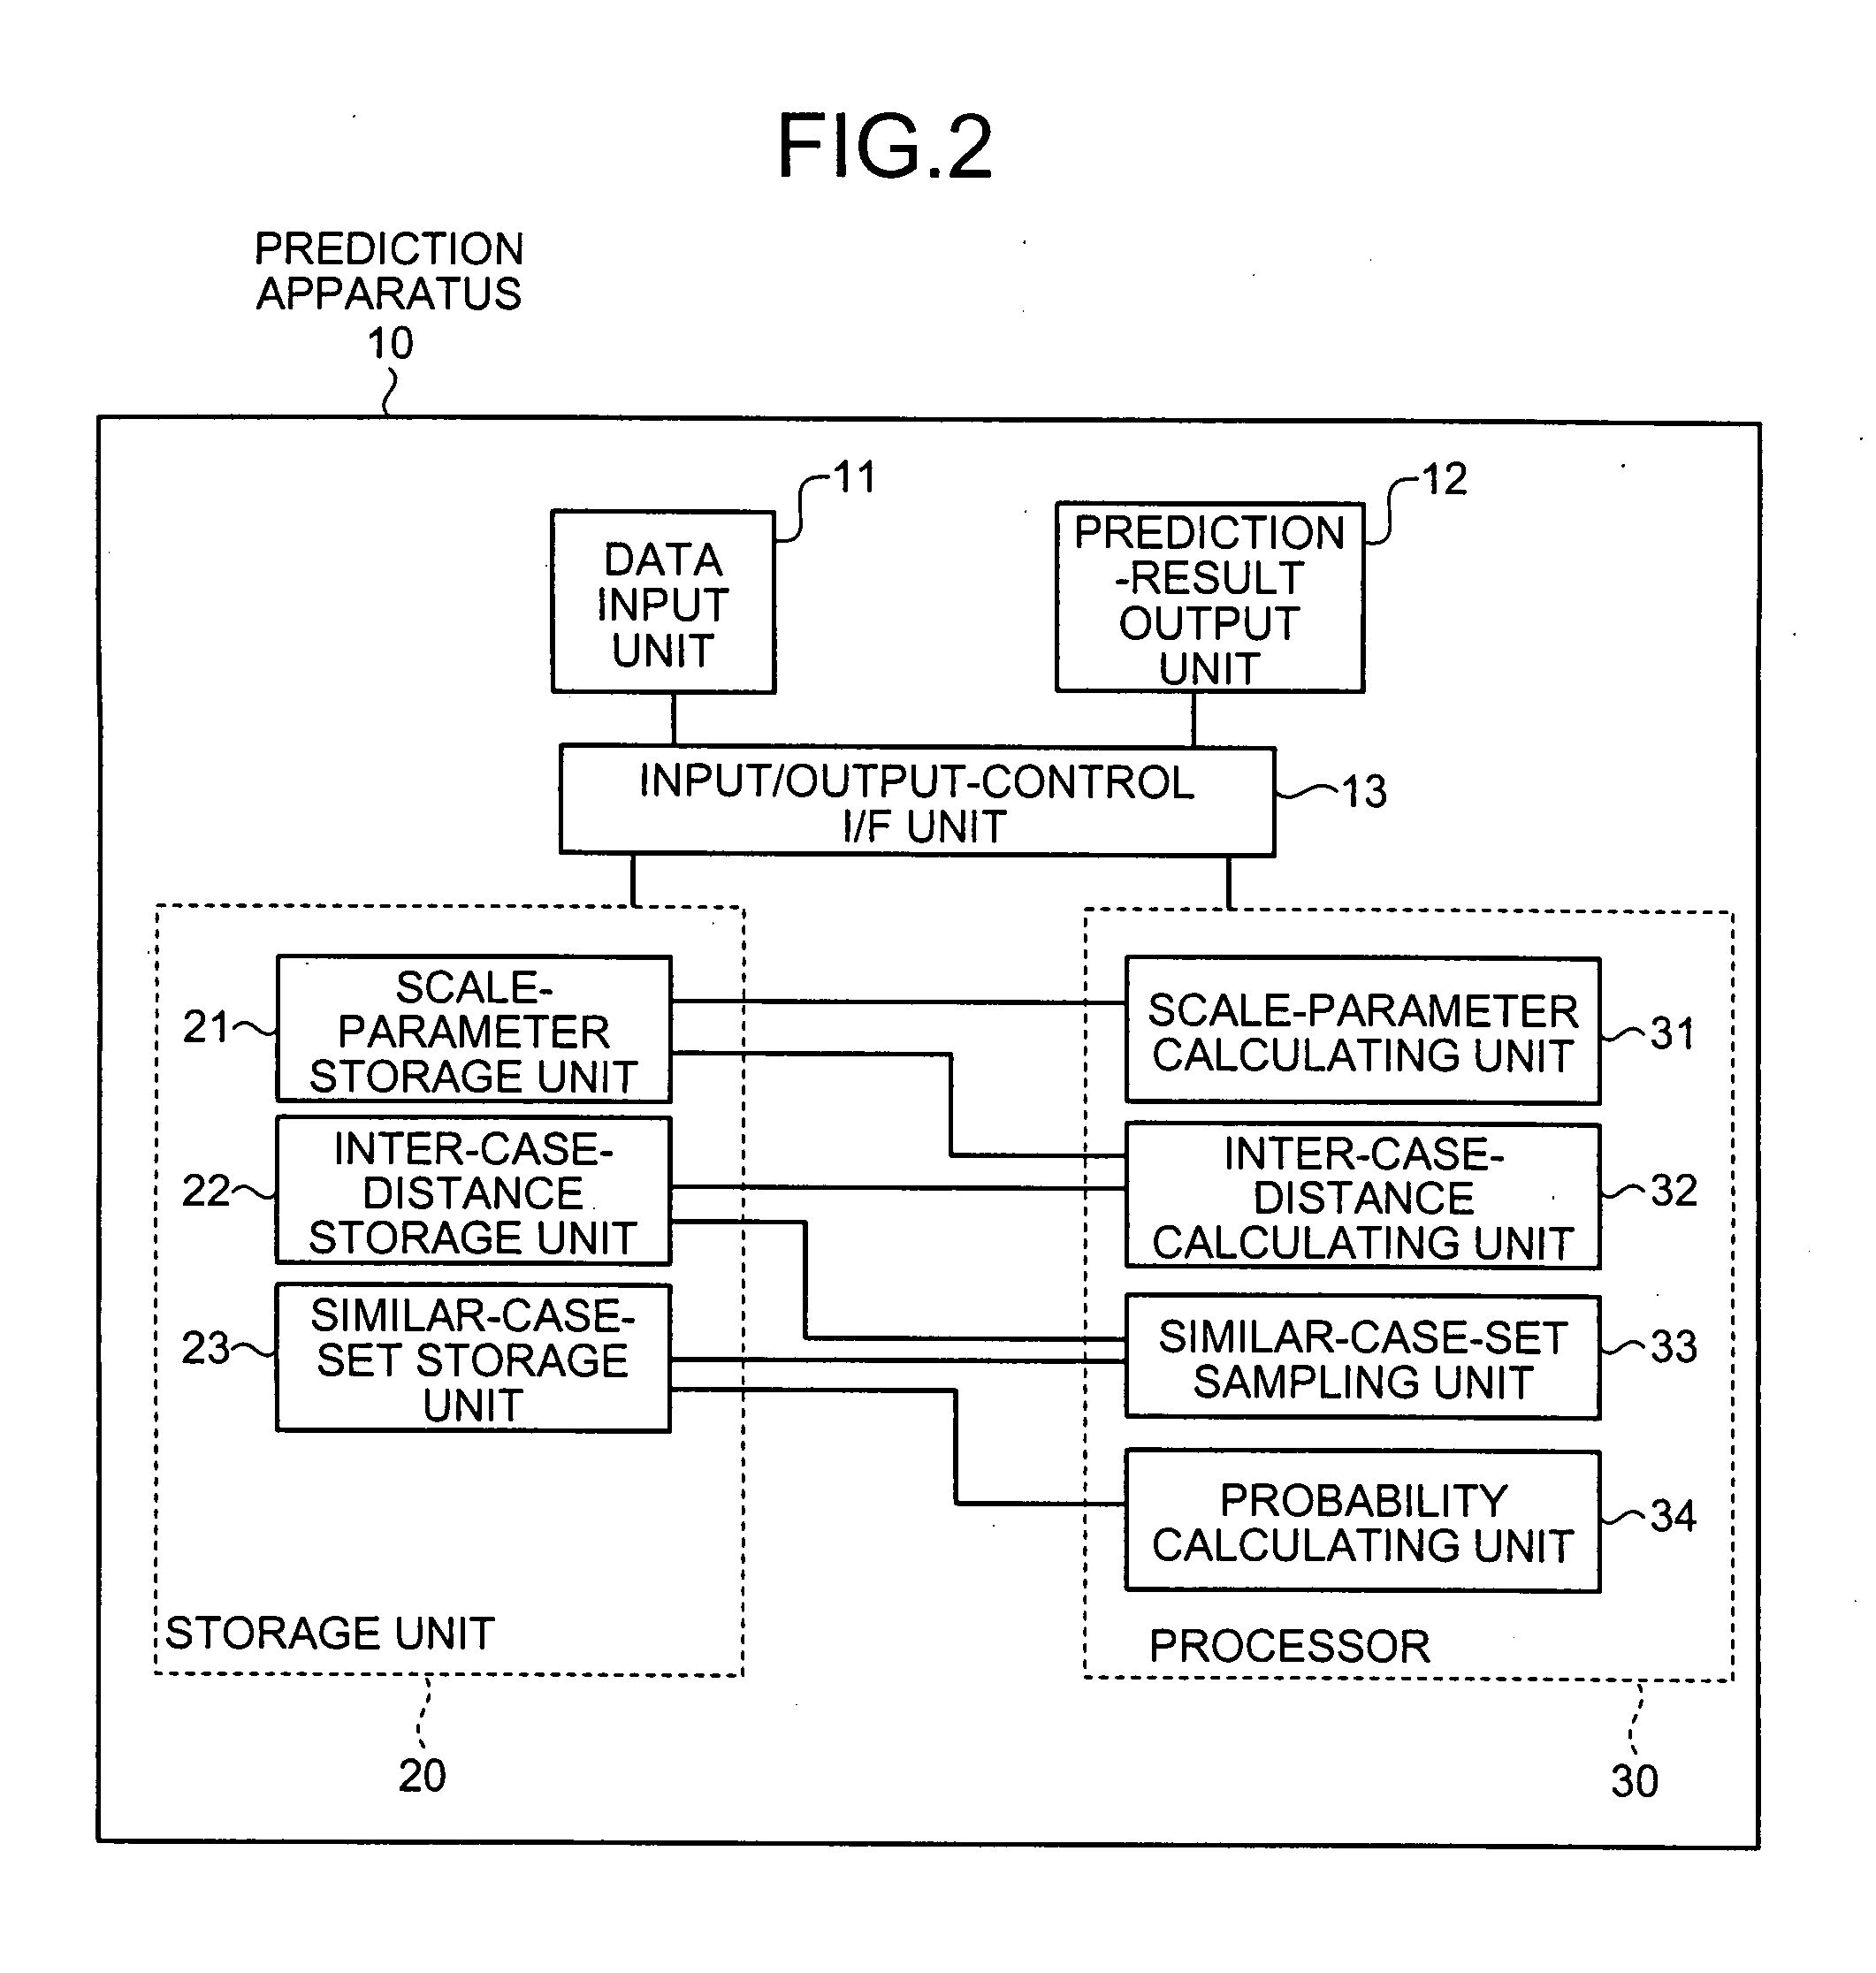 Computer-readable recording medium, apparatus and method for calculating scale-parameter